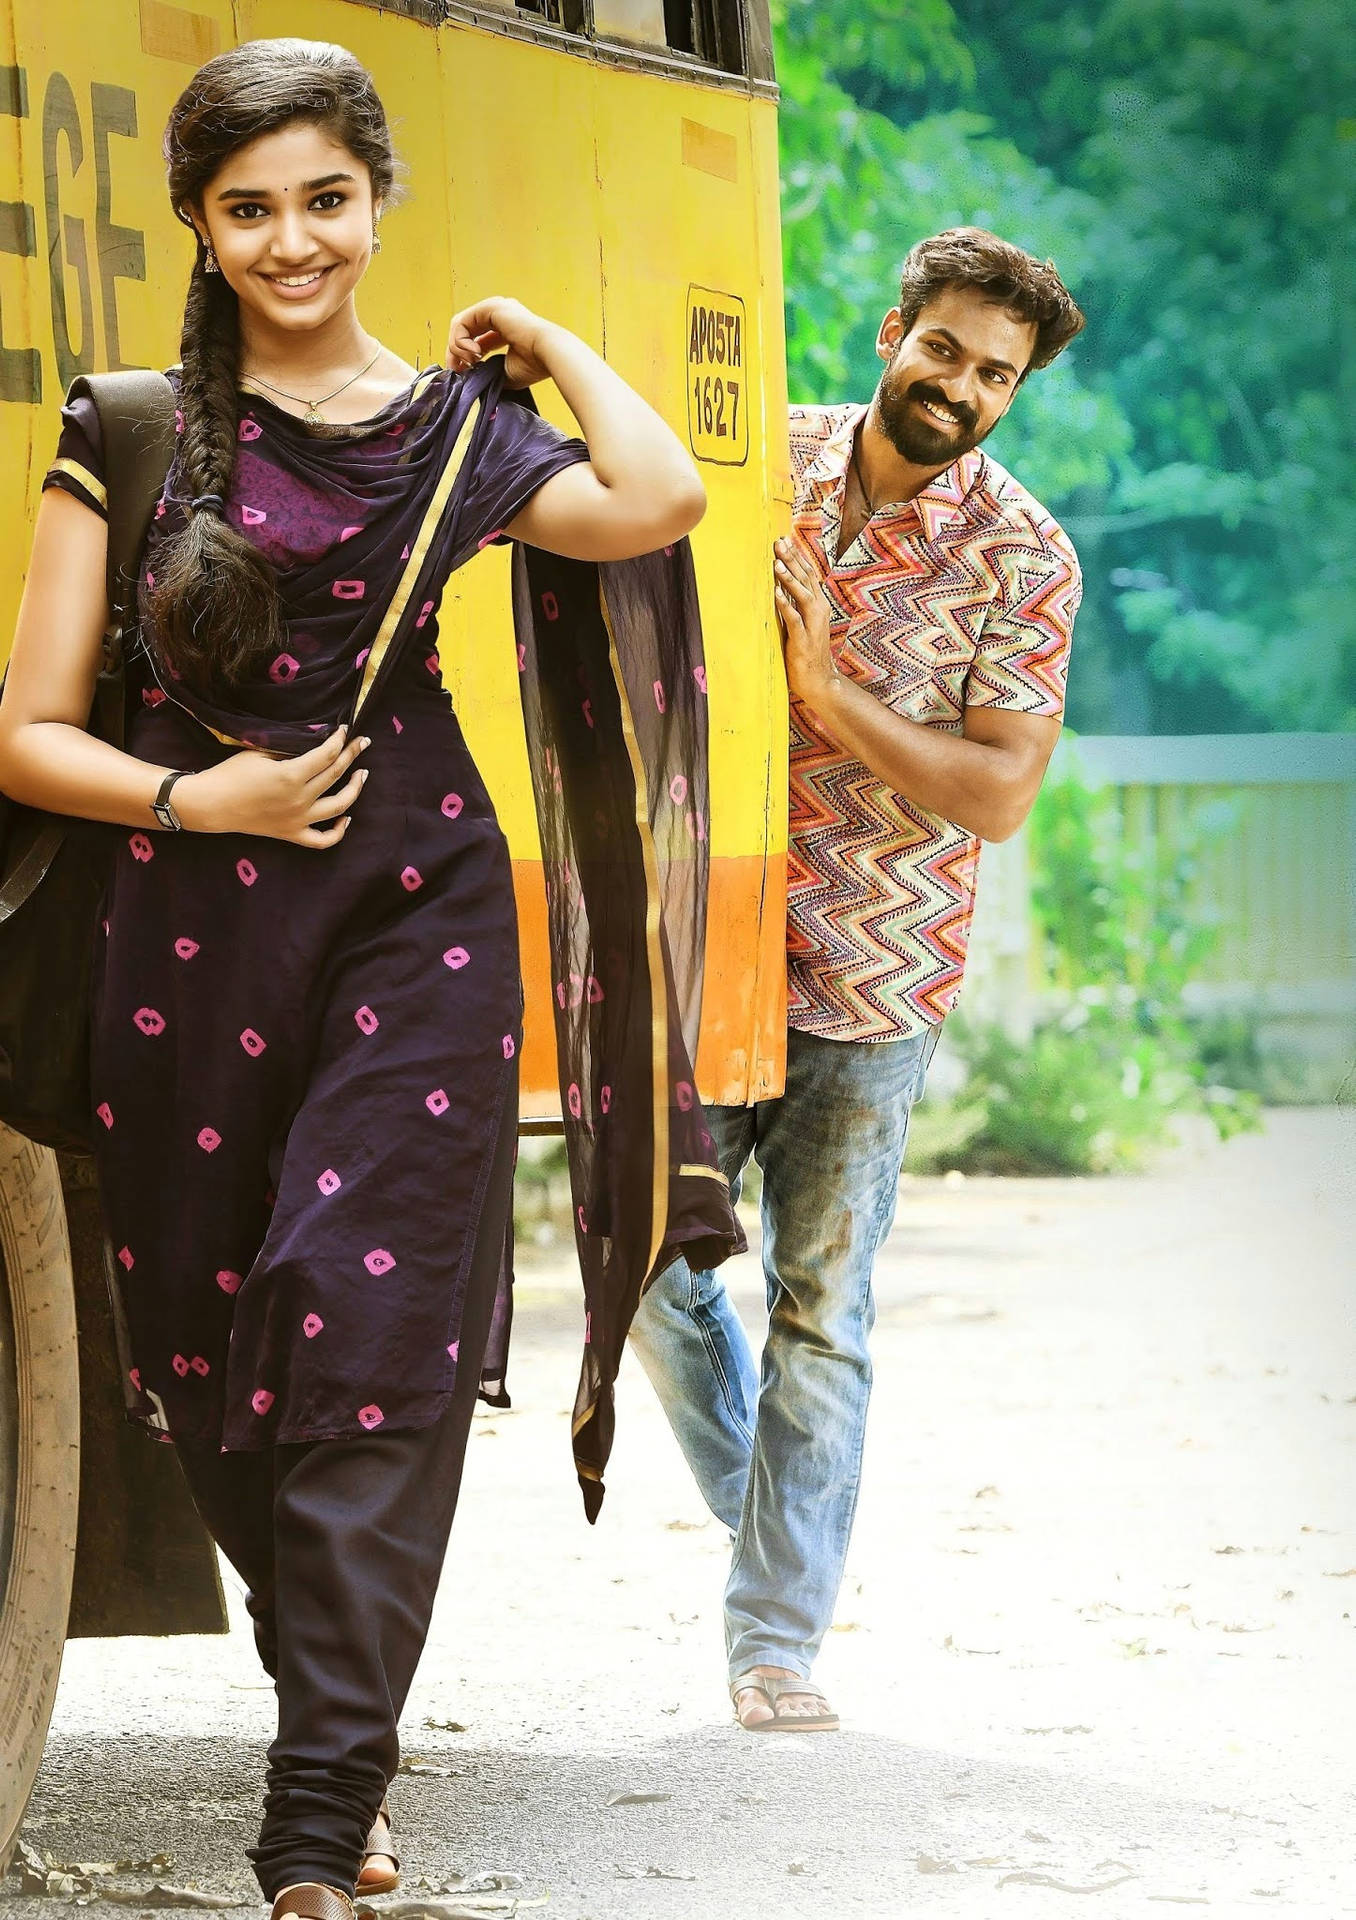 Uppena Sangeetha And Aasi Bus Scene Wallpaper